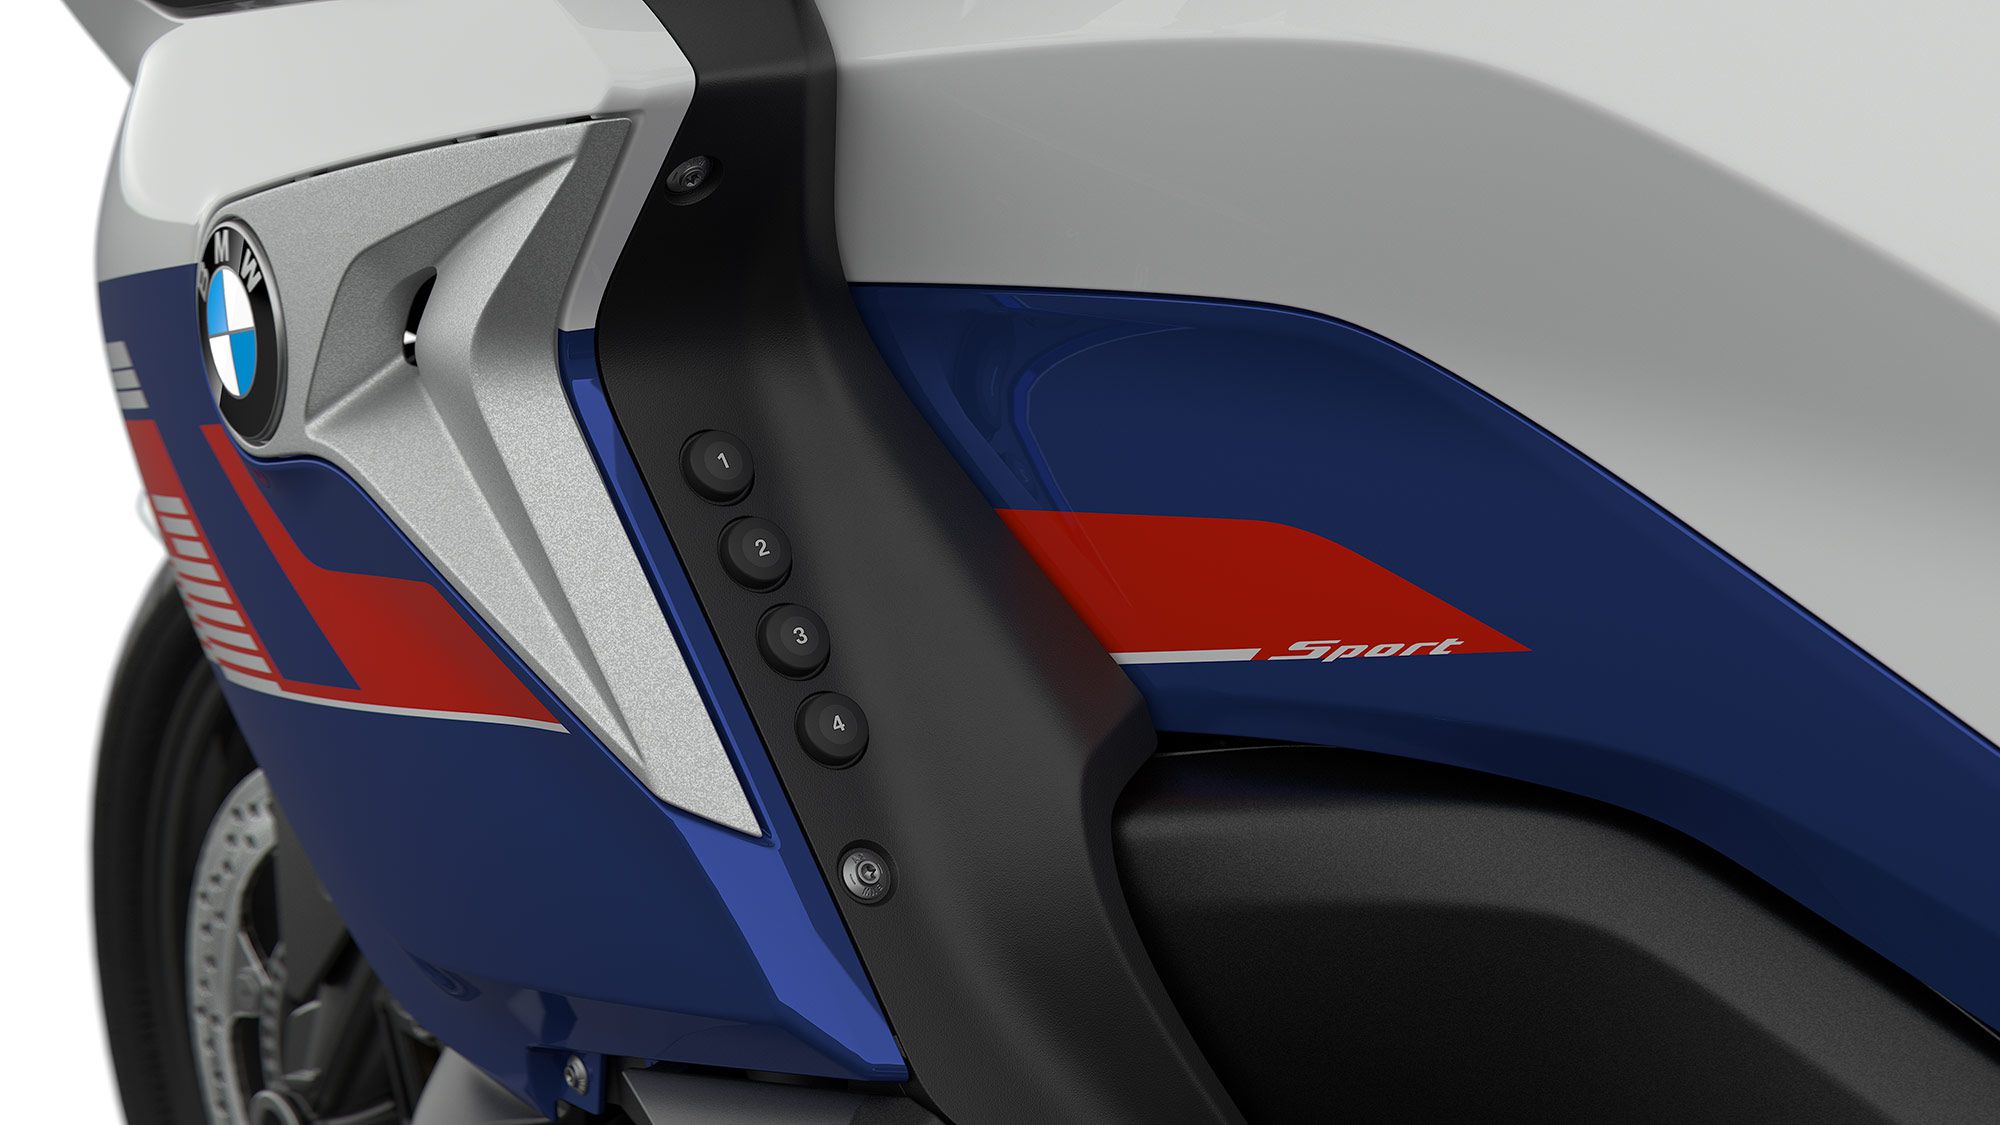 Riders can select up to 18 different functions using the four buttons built into the left-side fairing.